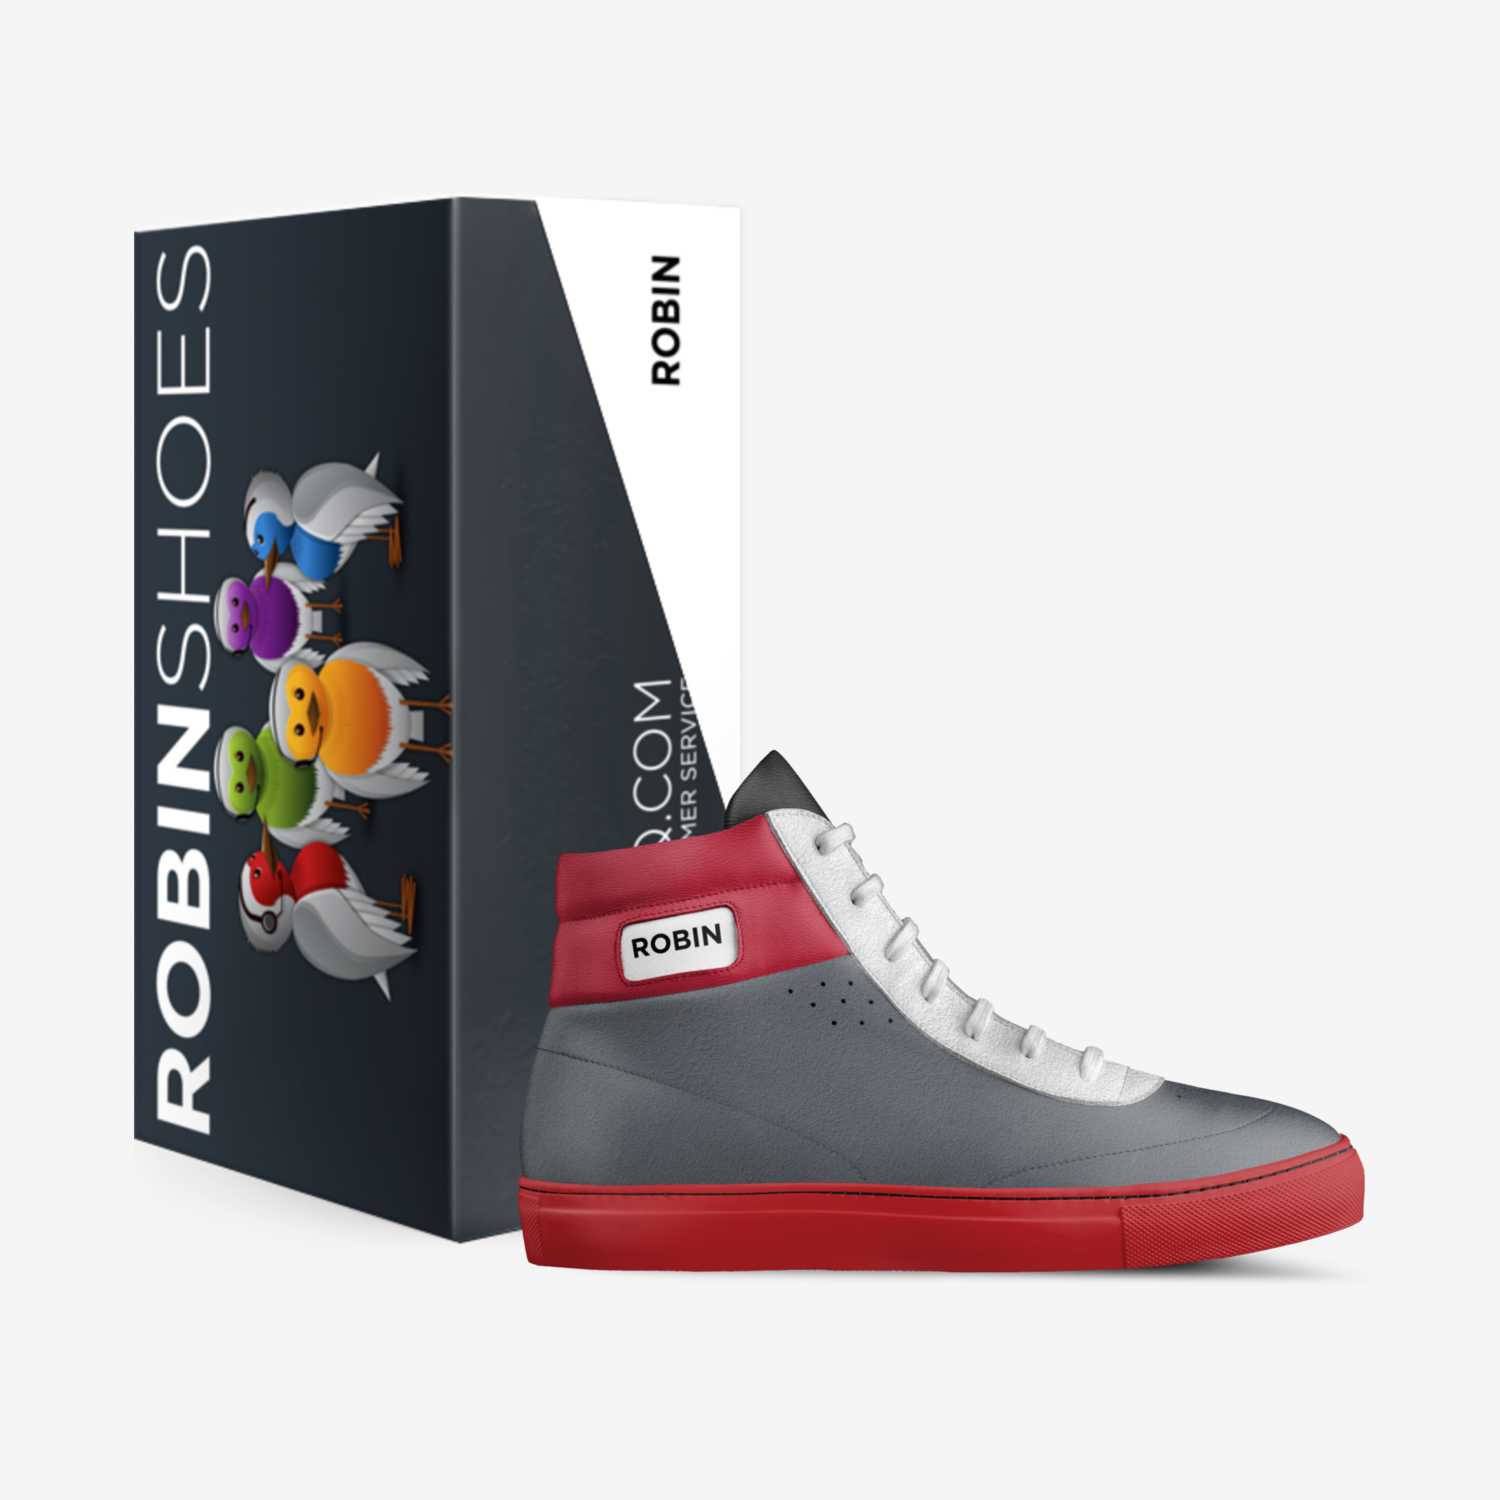 ROBIN custom made in Italy shoes by Patrick Speijers | Box view